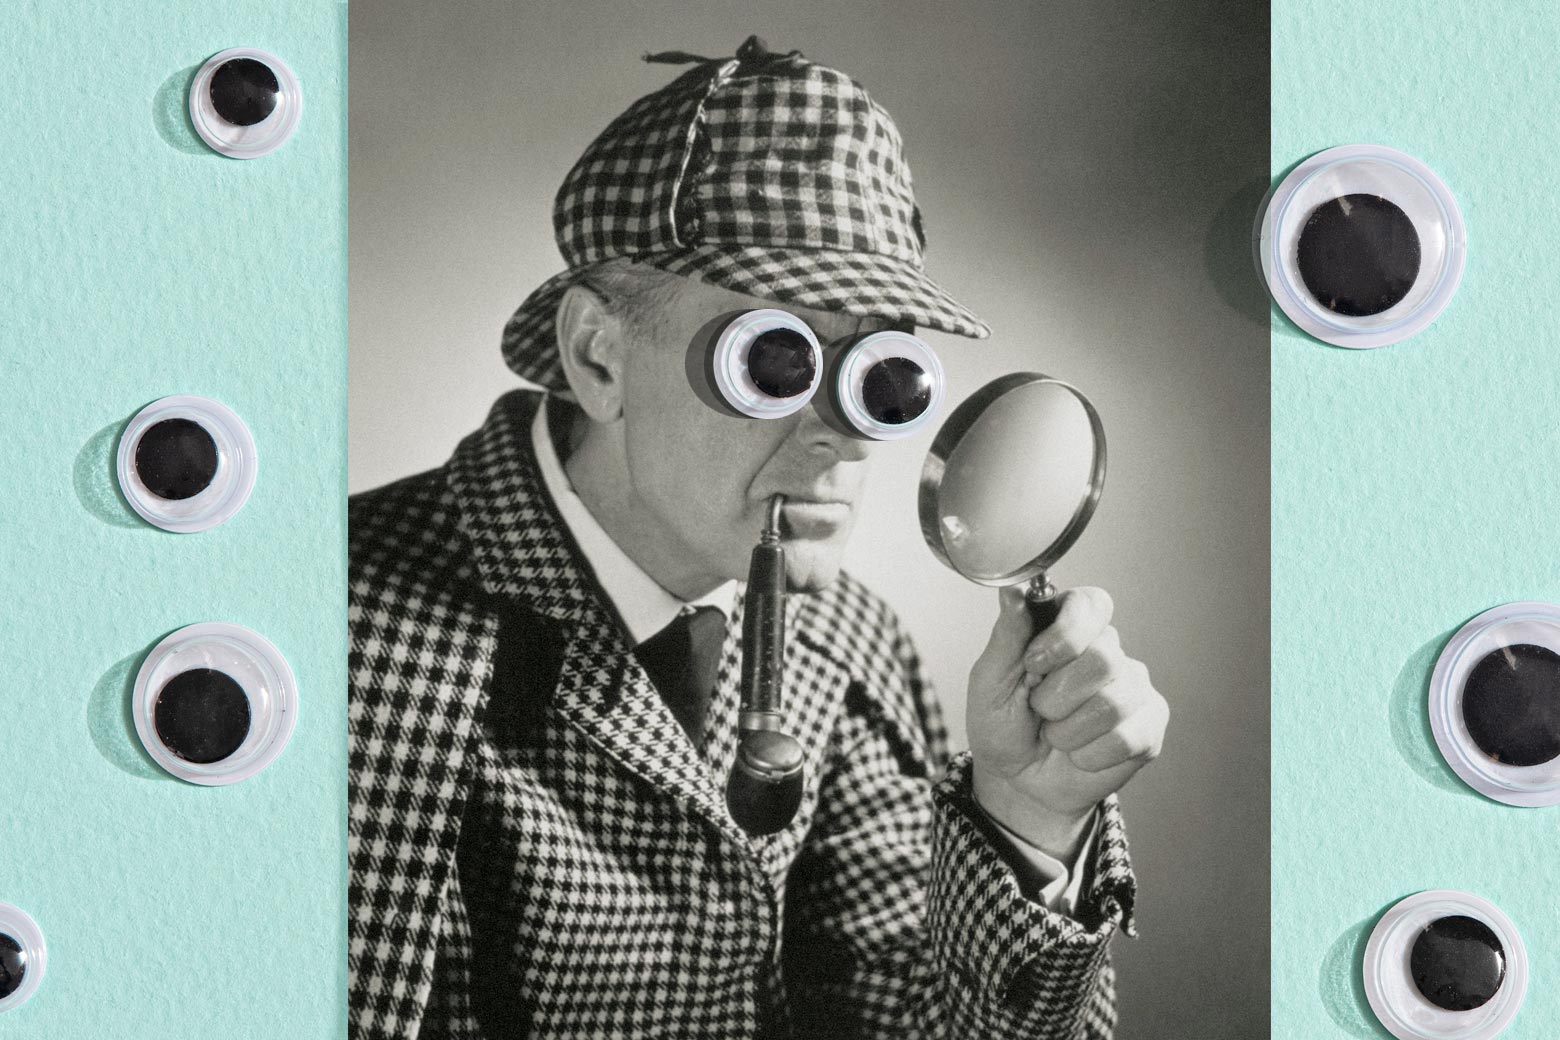 Is Everything Everywhere All at Once causing a googly eye shortage? An  investigation.